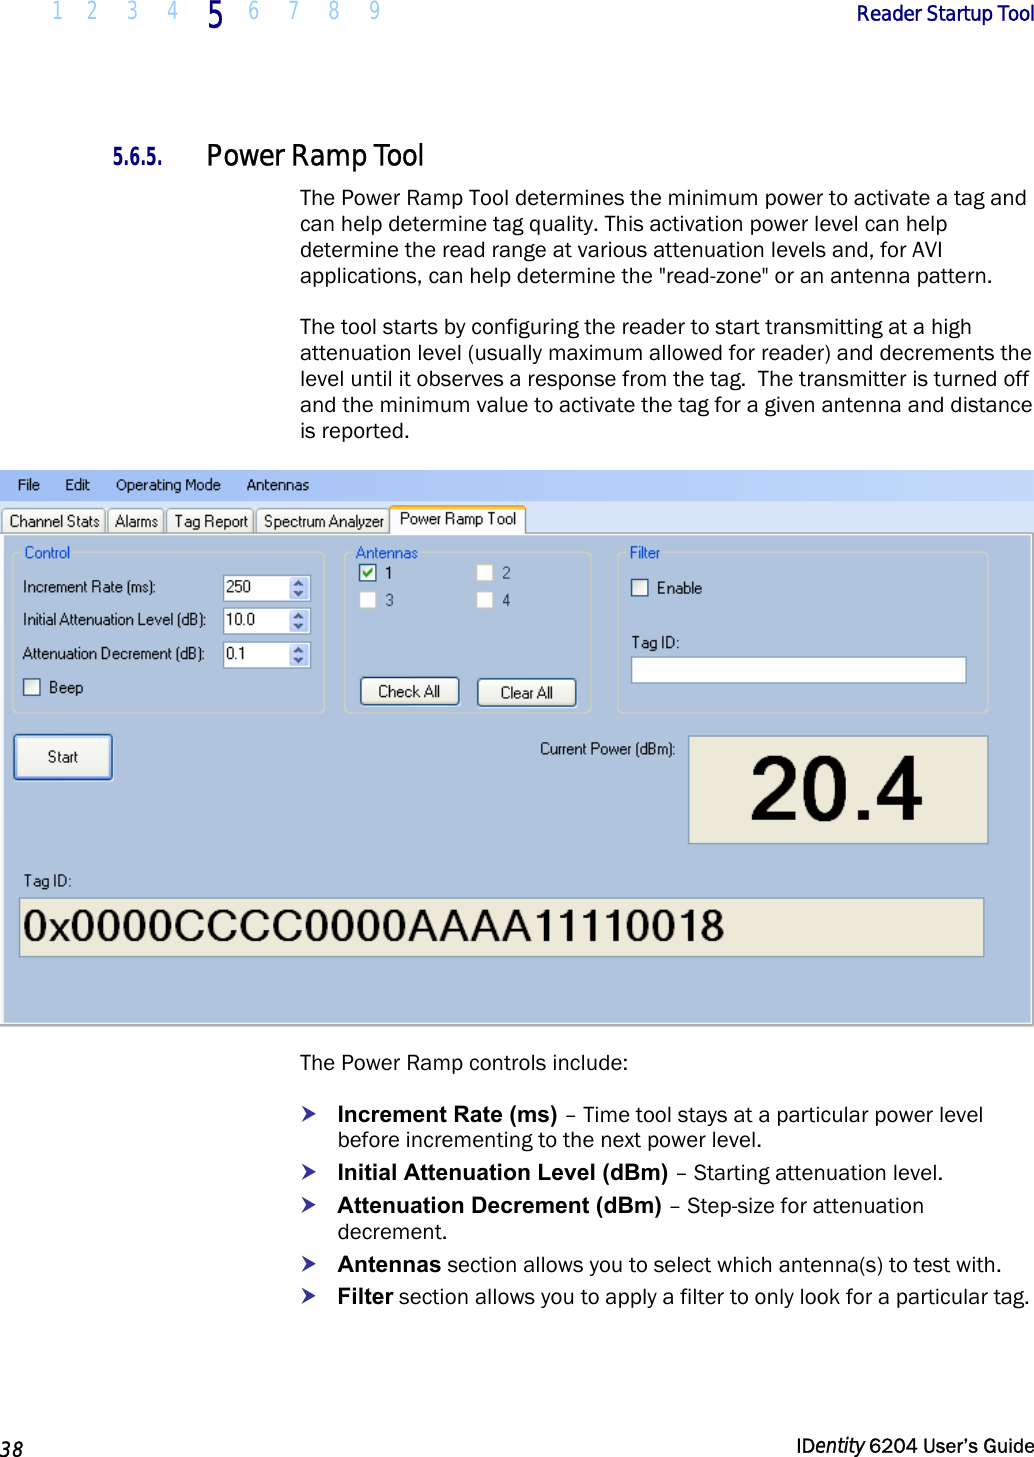  1 2  3  4 5  6 7 8 9        Reader Startup Tool   38   IDentity 6204 User’s Guide  5.6.5. Power Ramp Tool The Power Ramp Tool determines the minimum power to activate a tag and can help determine tag quality. This activation power level can help determine the read range at various attenuation levels and, for AVI applications, can help determine the &quot;read-zone&quot; or an antenna pattern. The tool starts by configuring the reader to start transmitting at a high attenuation level (usually maximum allowed for reader) and decrements the level until it observes a response from the tag.  The transmitter is turned off and the minimum value to activate the tag for a given antenna and distance is reported.  The Power Ramp controls include: h Increment Rate (ms) – Time tool stays at a particular power level before incrementing to the next power level. h Initial Attenuation Level (dBm) – Starting attenuation level. h Attenuation Decrement (dBm) – Step-size for attenuation decrement. h Antennas section allows you to select which antenna(s) to test with. h Filter section allows you to apply a filter to only look for a particular tag.  